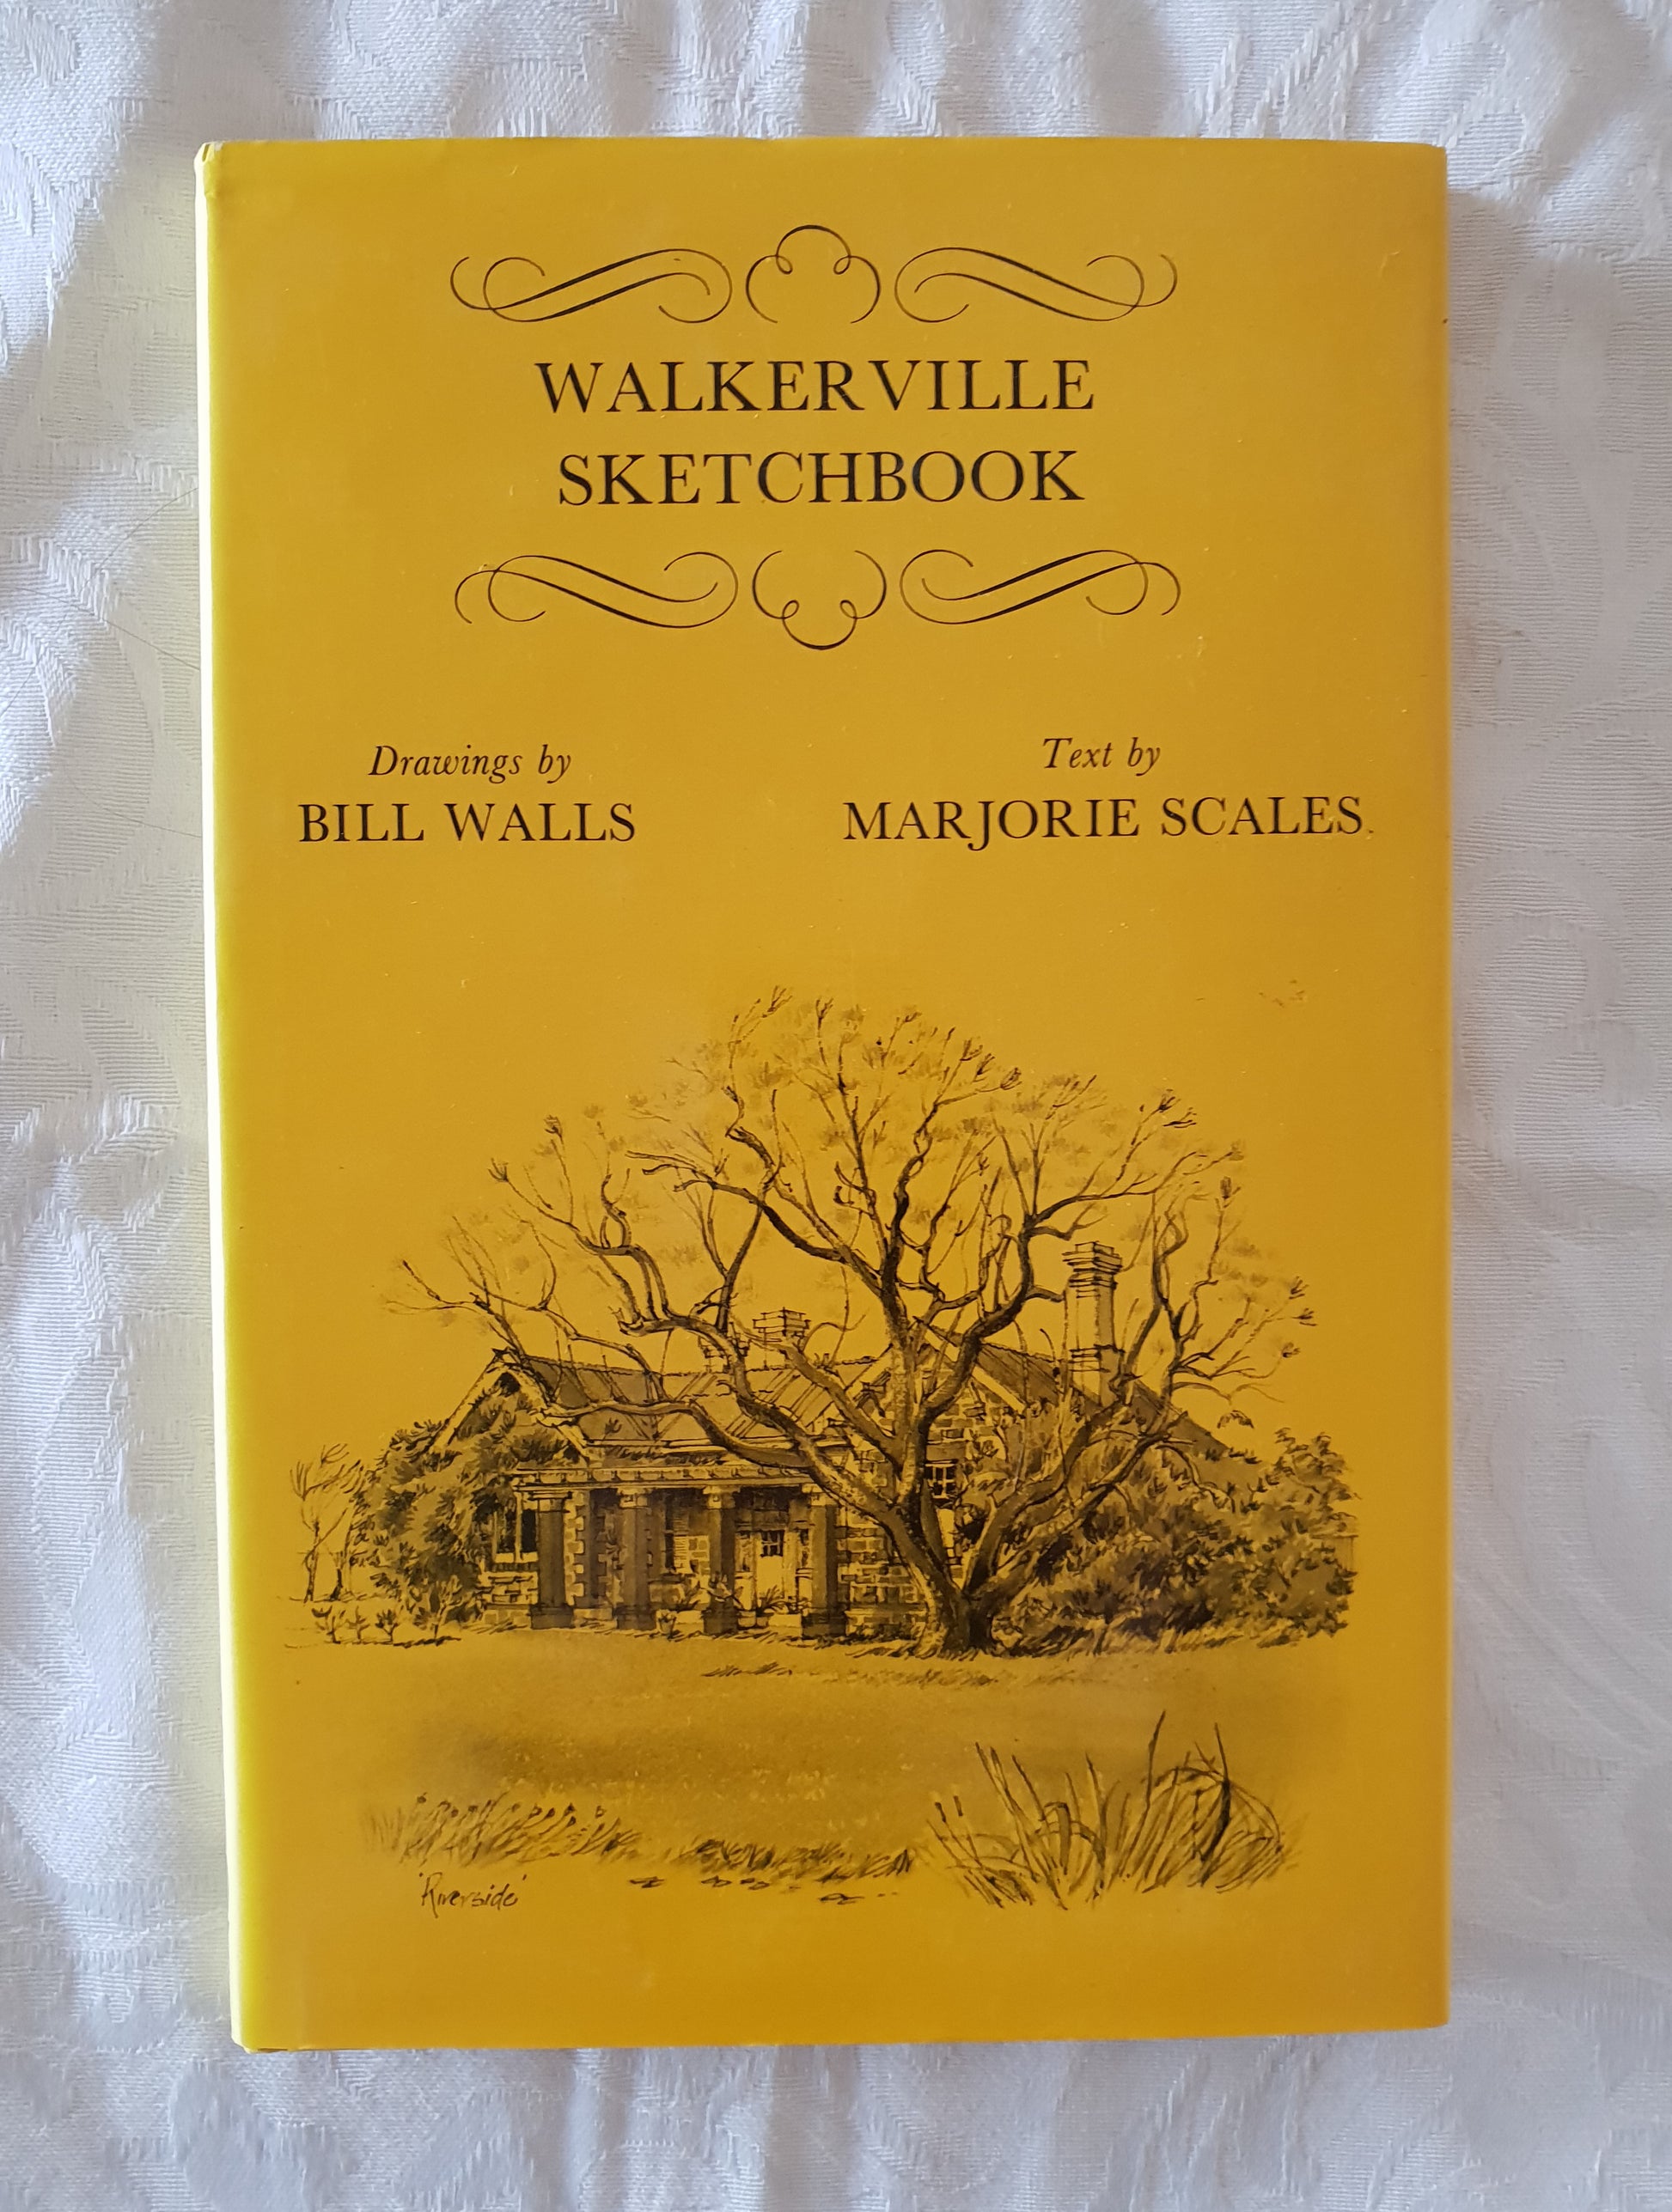 Walkerville Sketchbook  Drawings by Bill Walls and Text by Marjorie Scales